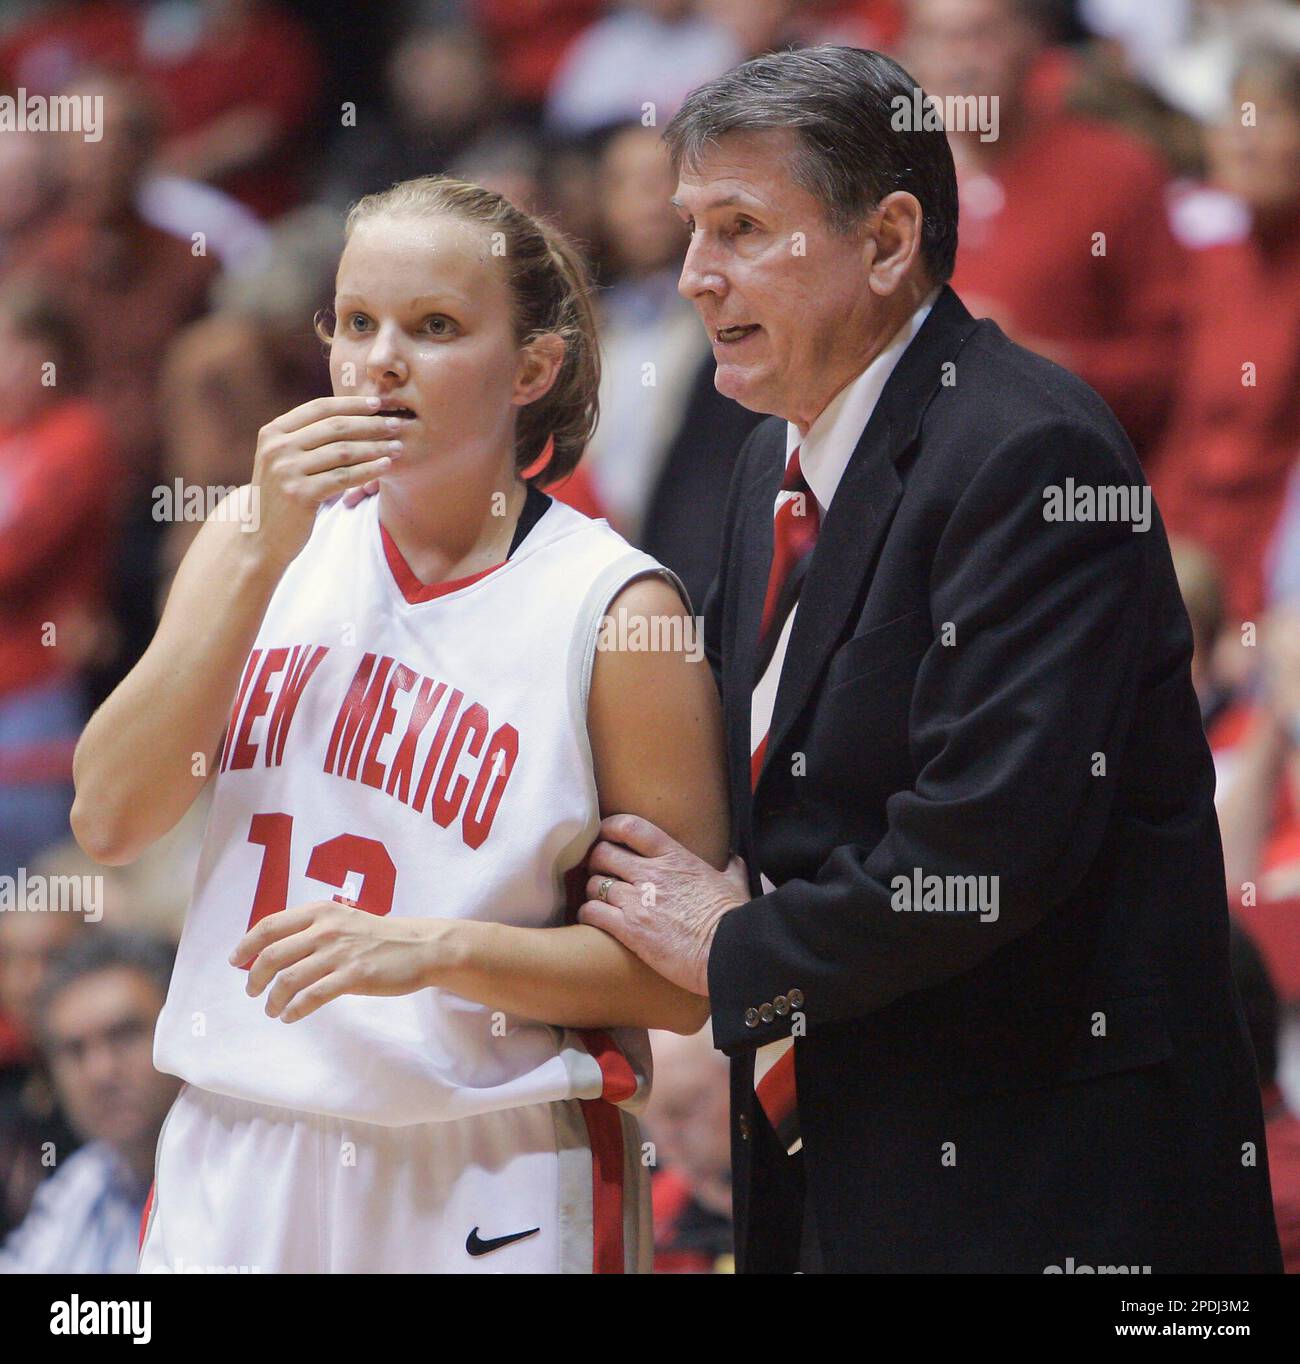 New Mexico coach Don Flanagan goes over some instructions with Katie Montgomery in the final seconds of the UNM Thanksgiving Tournament championship game at The Pit in Albuquerque, N.M., Saturday, Nov. 26, 2005. New Mexico defeated Oklahoma State 56-52. (AP Photo/Jake Schoellkopf) Foto Stock